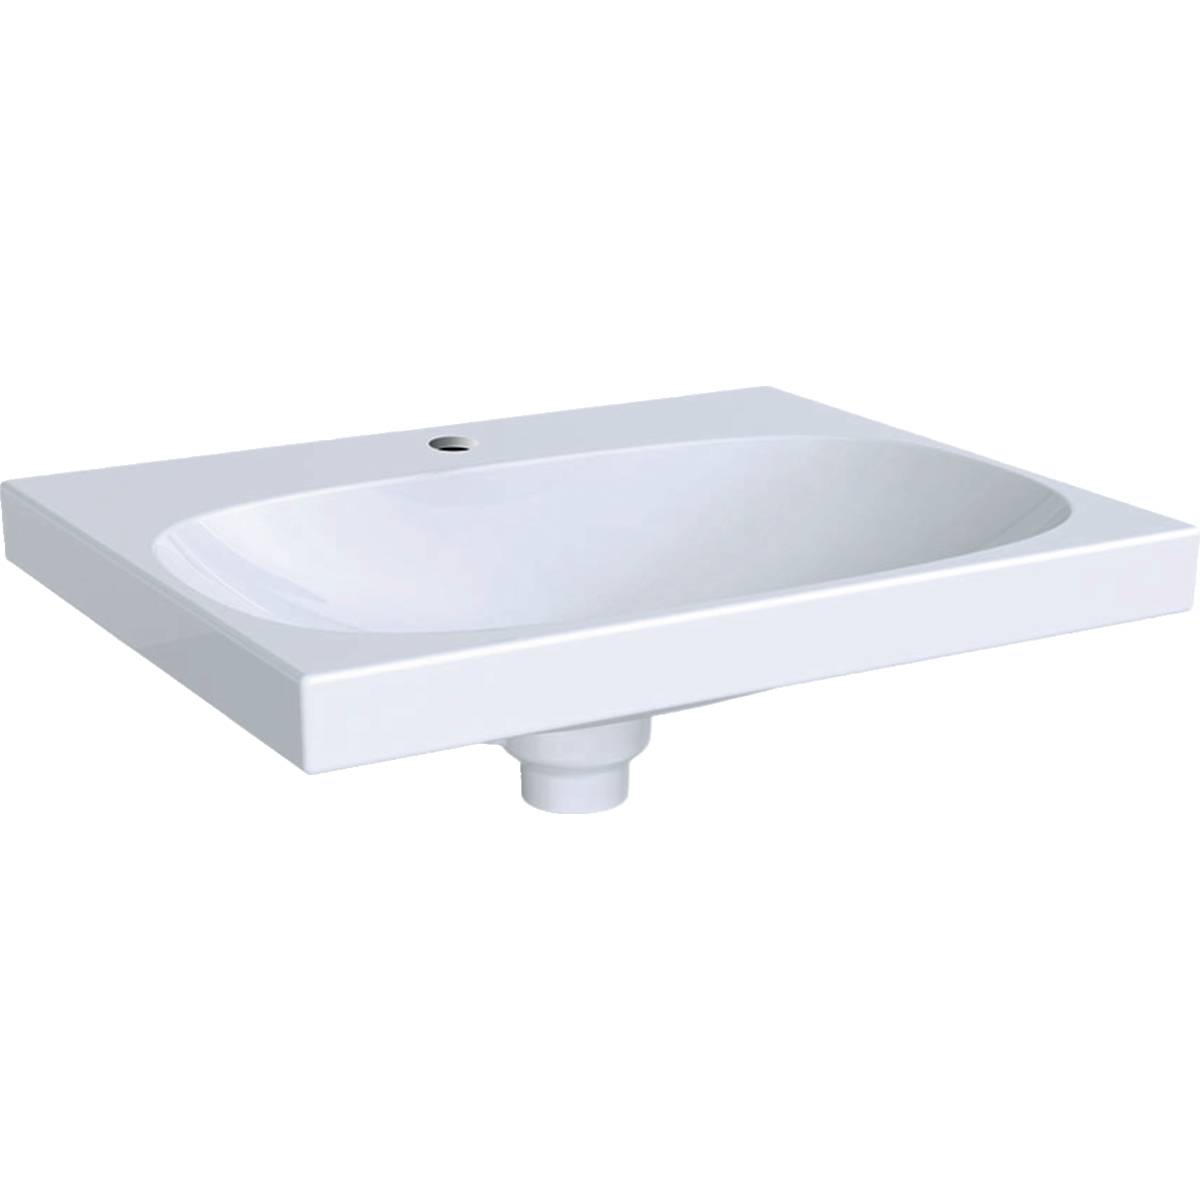 Acanto Washbasin with Hidden Overflow and Drain Cover